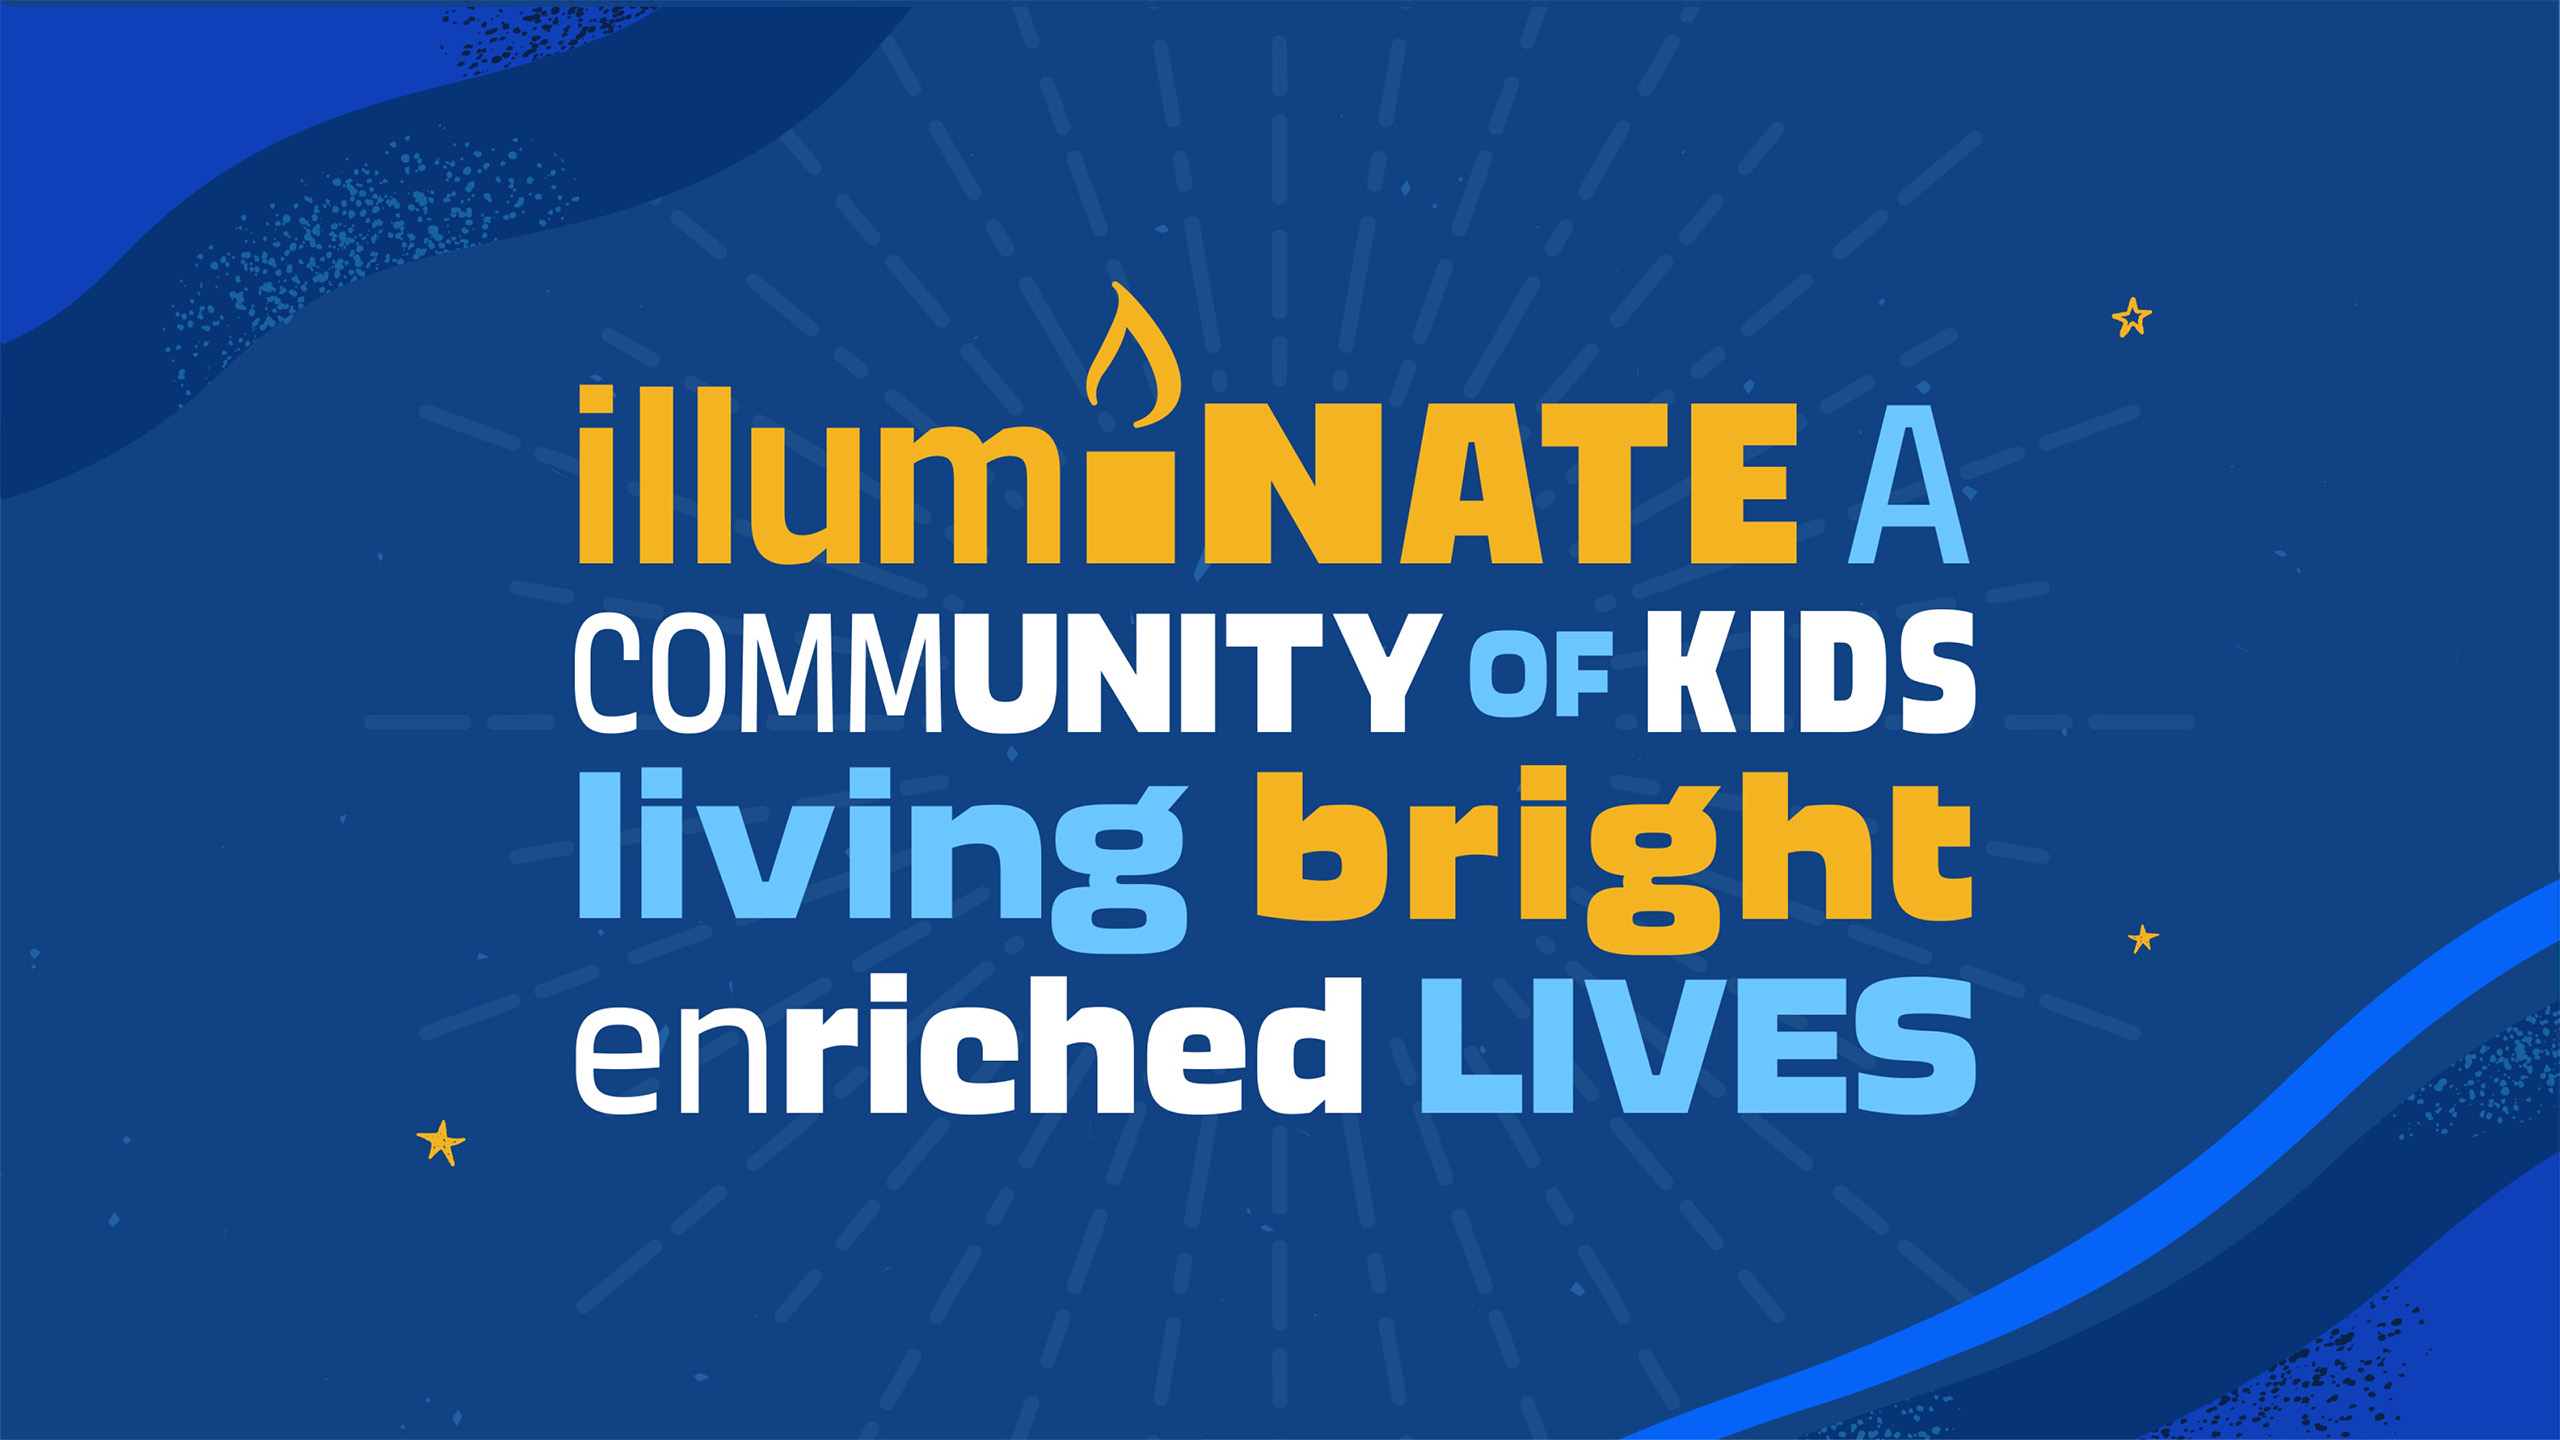 Illuminate a community of kids living bright enriched lives